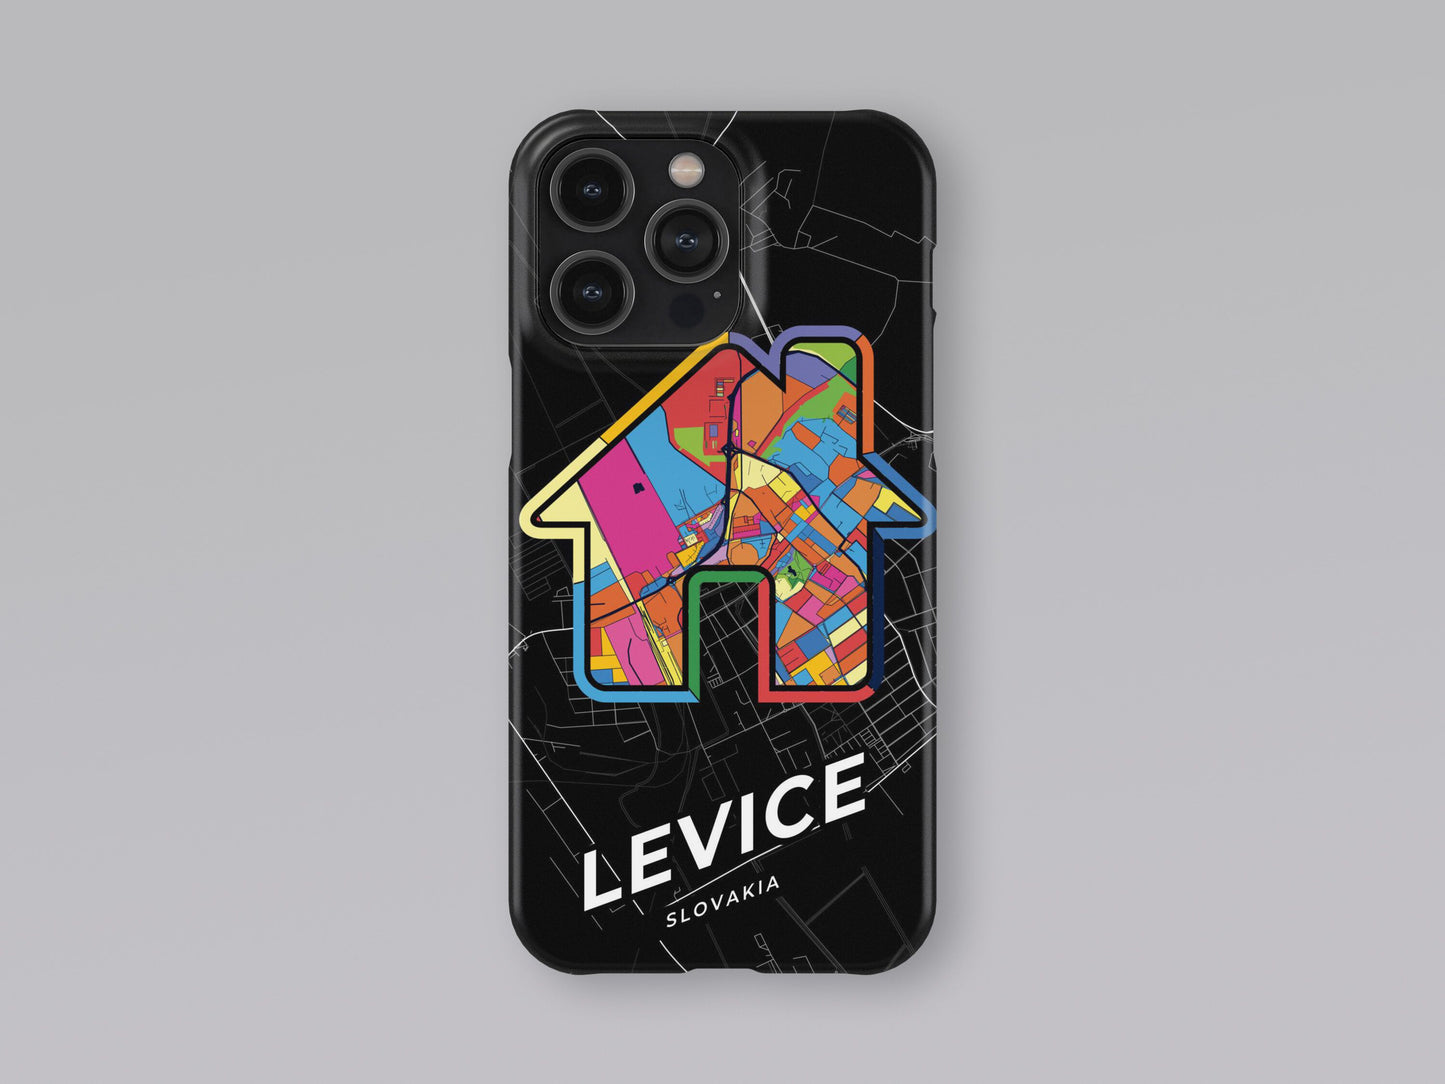 Levice Slovakia slim phone case with colorful icon. Birthday, wedding or housewarming gift. Couple match cases. 3